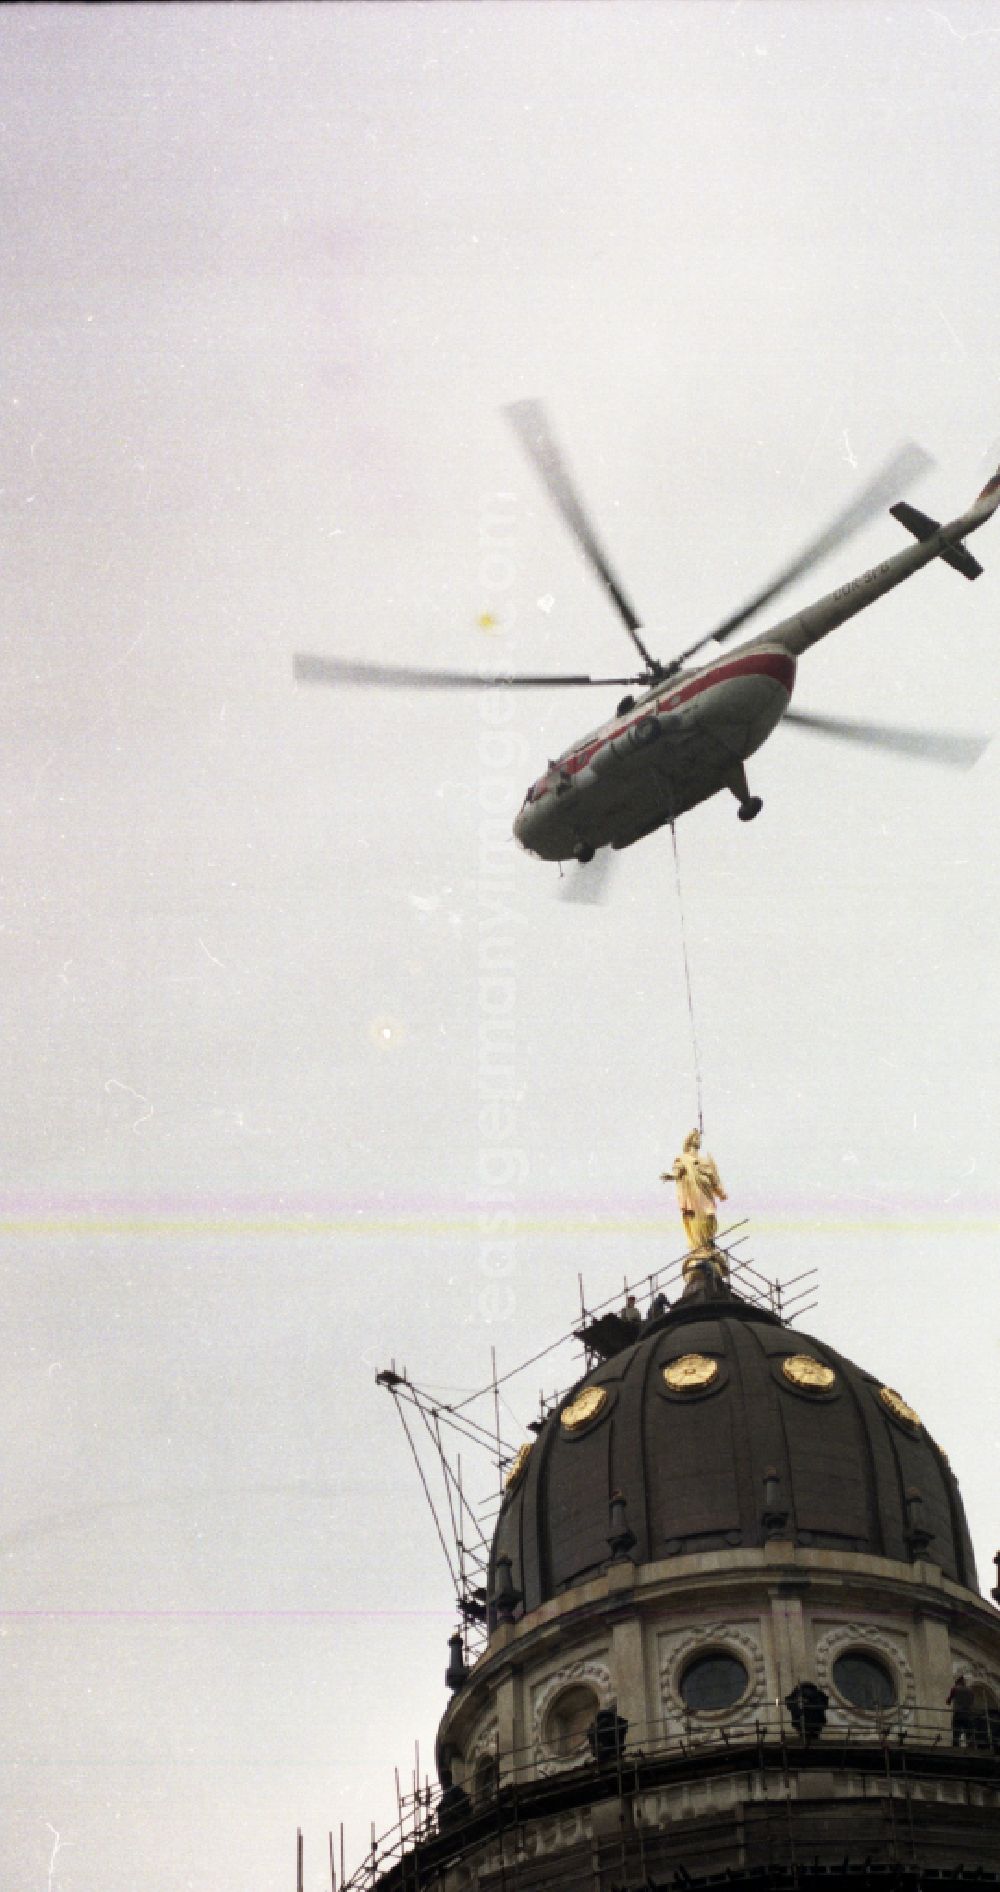 GDR image archive: Berlin - Special operation of an INTERFLUG - crane flight operation - Mi-8 helicopter to fly in the dome figure of the German Cathedral on Gendarmenmarkt in the district of Mitte in Berlin East Berlin on the territory of the former GDR, German Democratic Republic